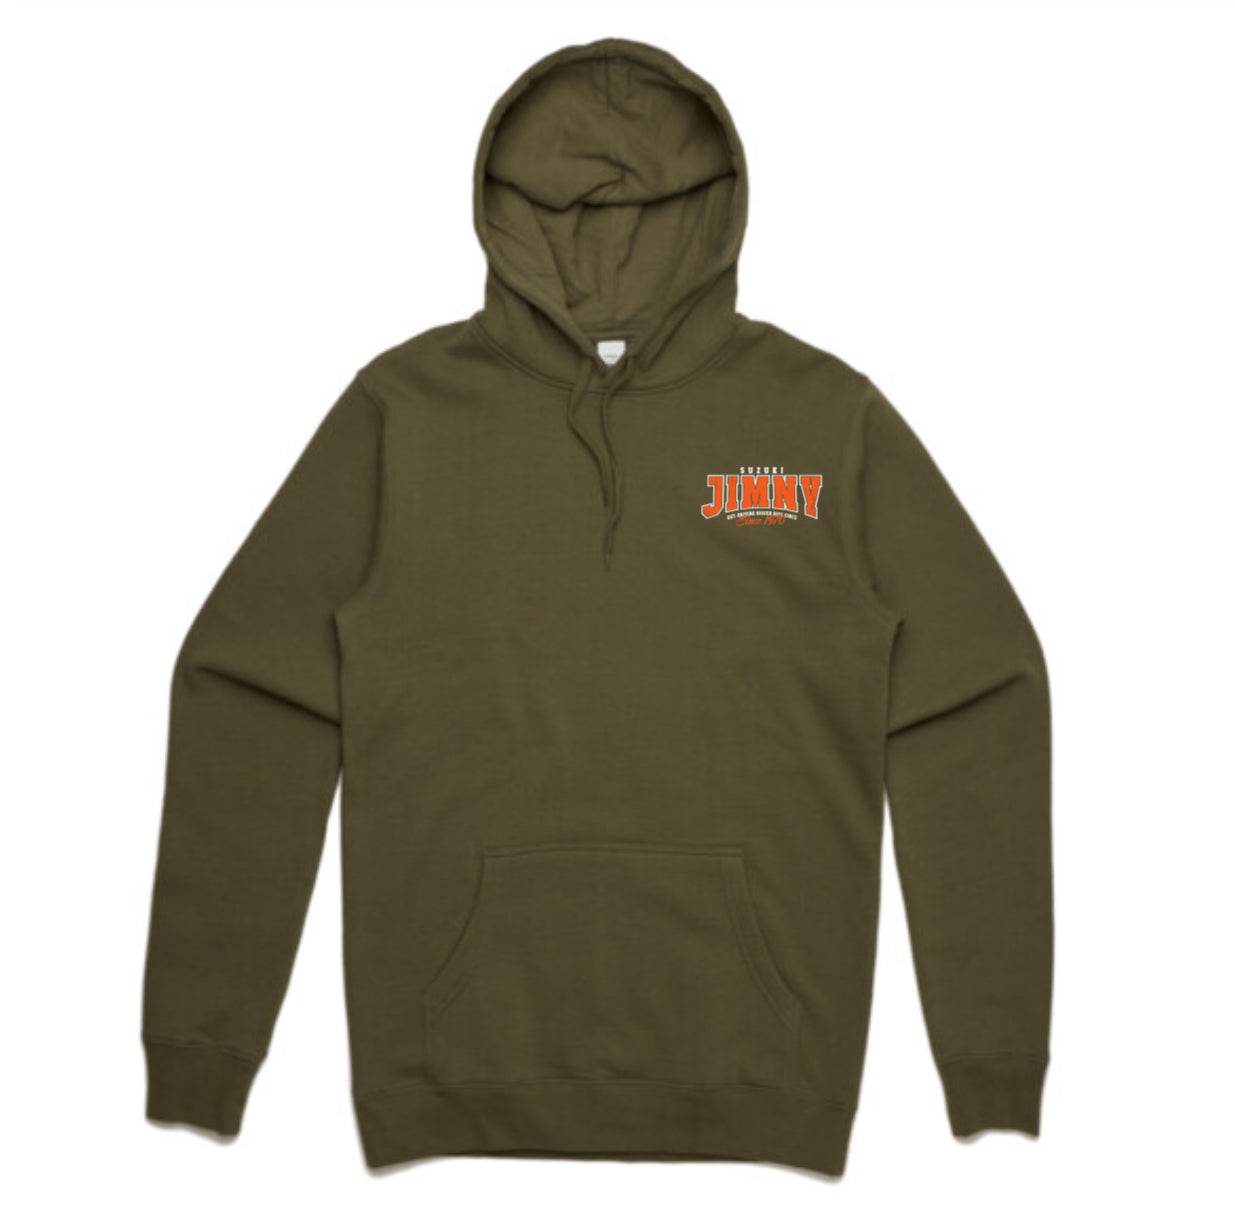 Outdriving Bigger Rigs hoodie